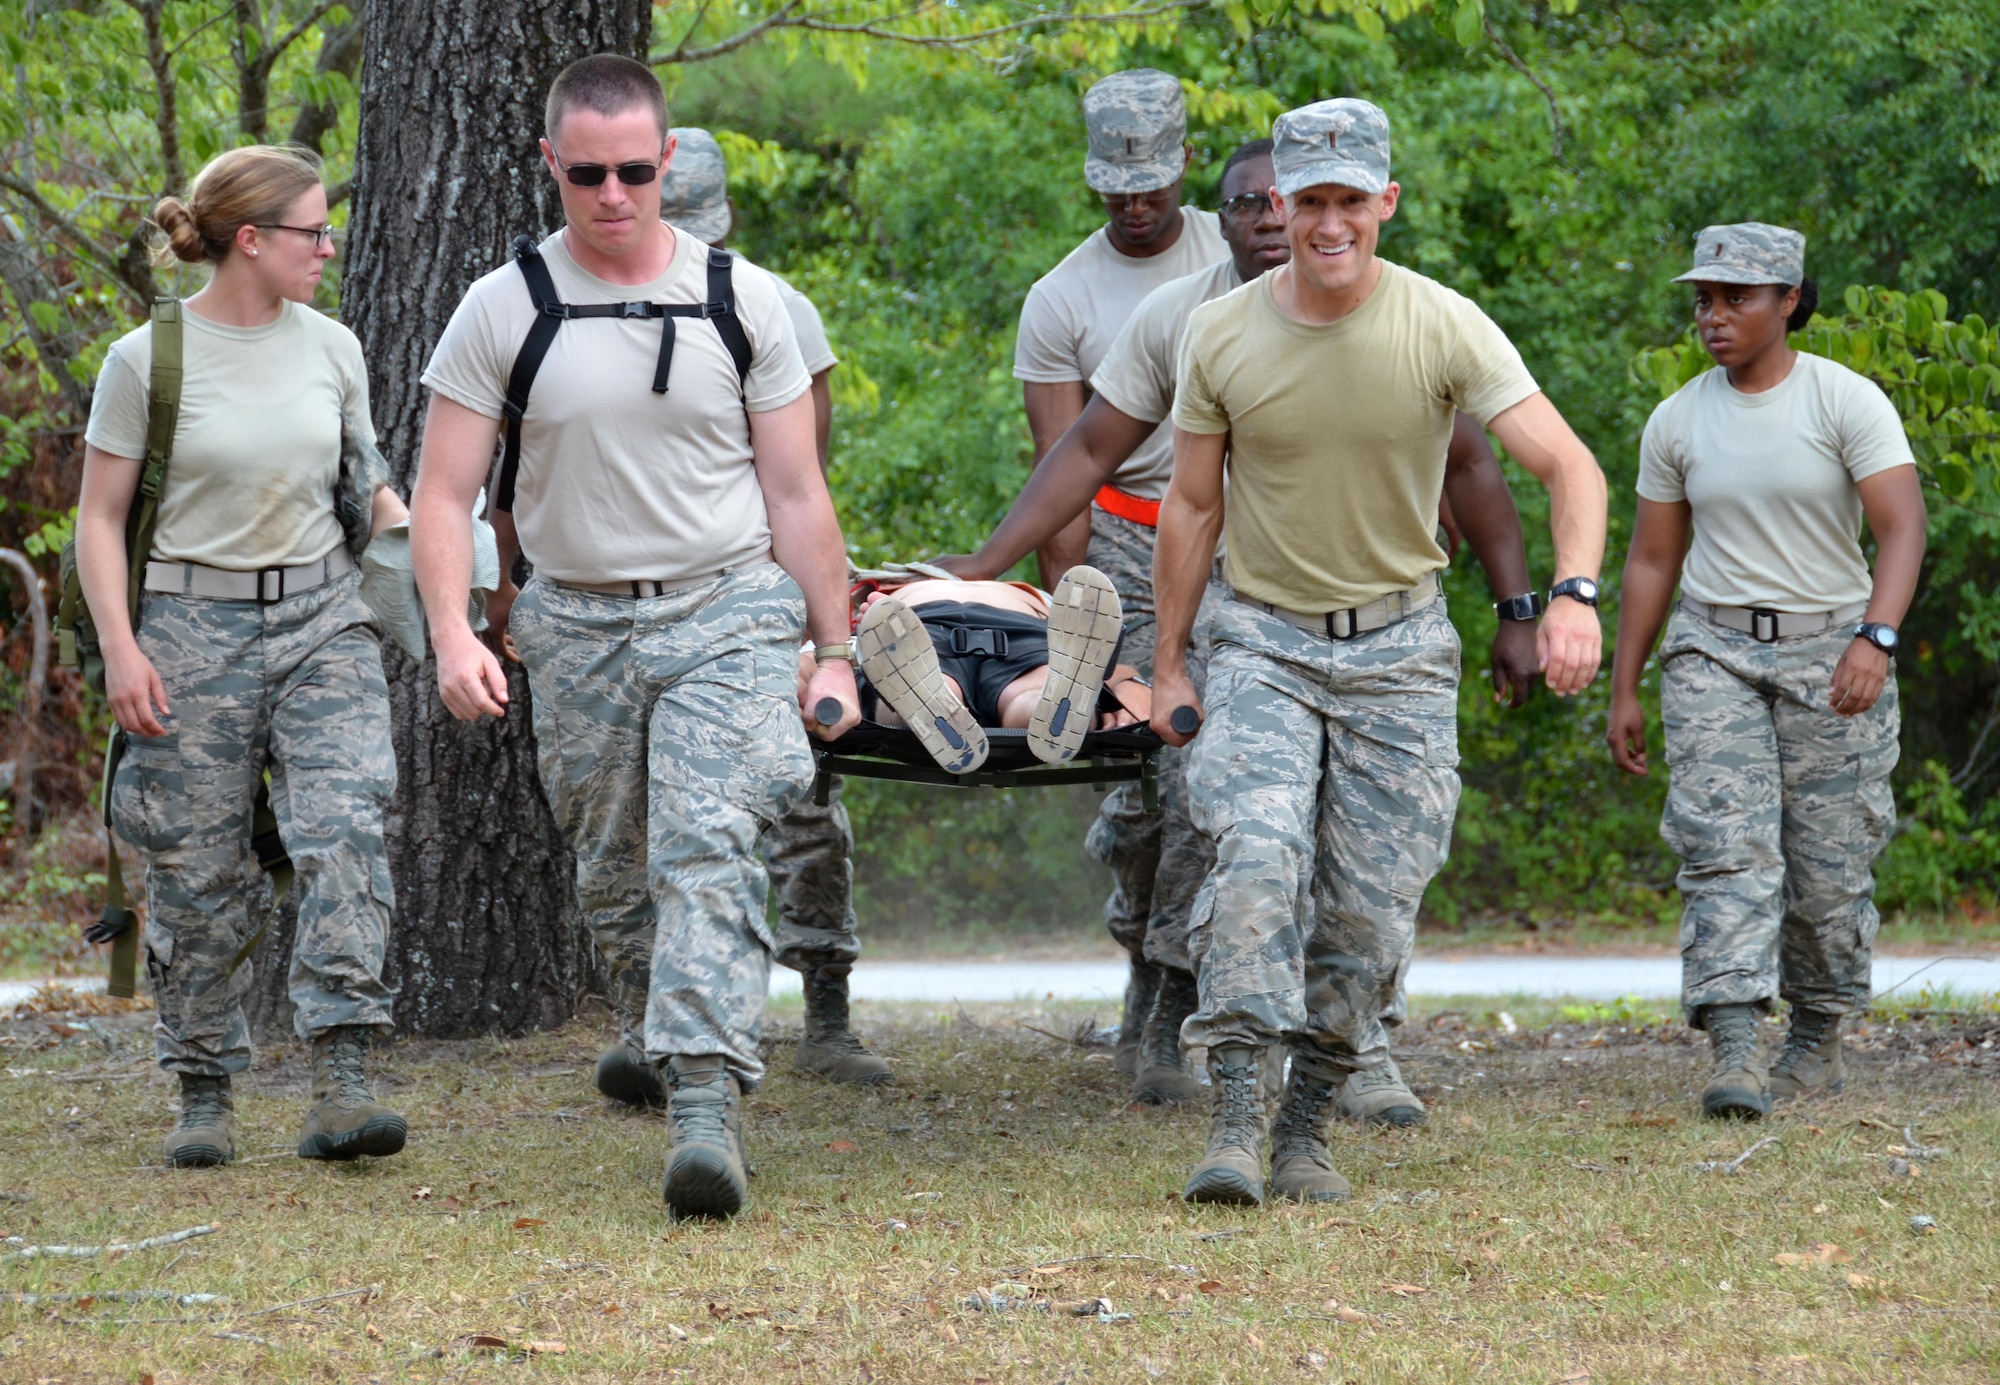 Chaplain candidates 2nd Lt. Kara Dula, 2nd Lt. Seth Duhs, 2nd Lt. Tyler Brown, 2nd Lt. Caleb Walker, and 2nd Lt. Jasmin Luck, work together to hoist and carry a casualty to a safe location at Robins Air Force Base, Georgia, July 25, 2016. The candidates had just completed self-aid buddy care classroom instruction when they were rushed outside to put their new knowledge to the test when an "attack" happened outside, resulting in casualties. The candidates are participants in the Air Force Reserve Command Chaplain Candidate Intensive Interview program which aims to provide an extensive overview of what the Air Force Reserve mission is as well as a broad overview of the military chaplain corps.(U.S. Air Force photo/Tech. Sgt. Kelly Goonan)